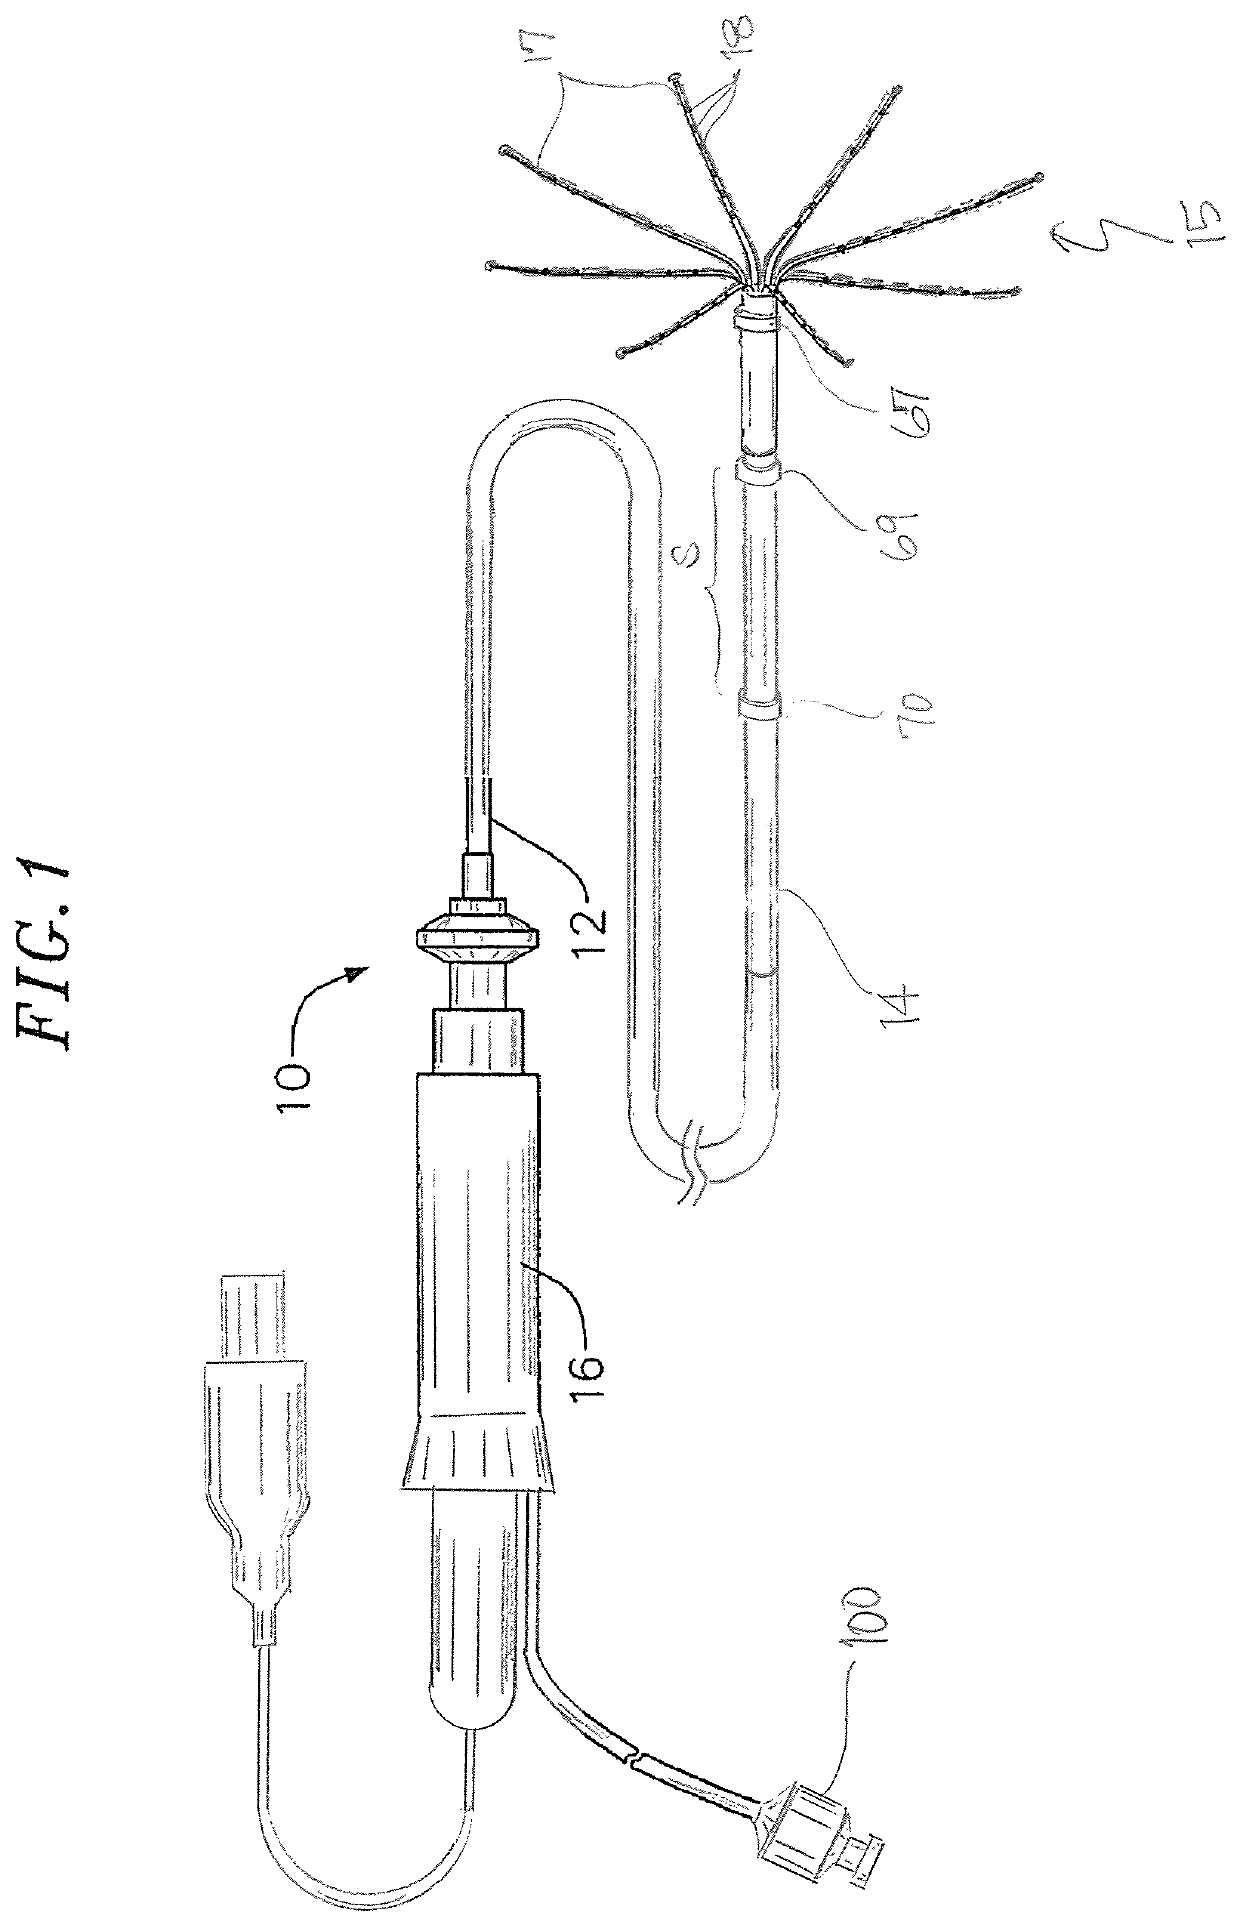 Catheter with increased electrode density spine assembly having reinforced spine covers